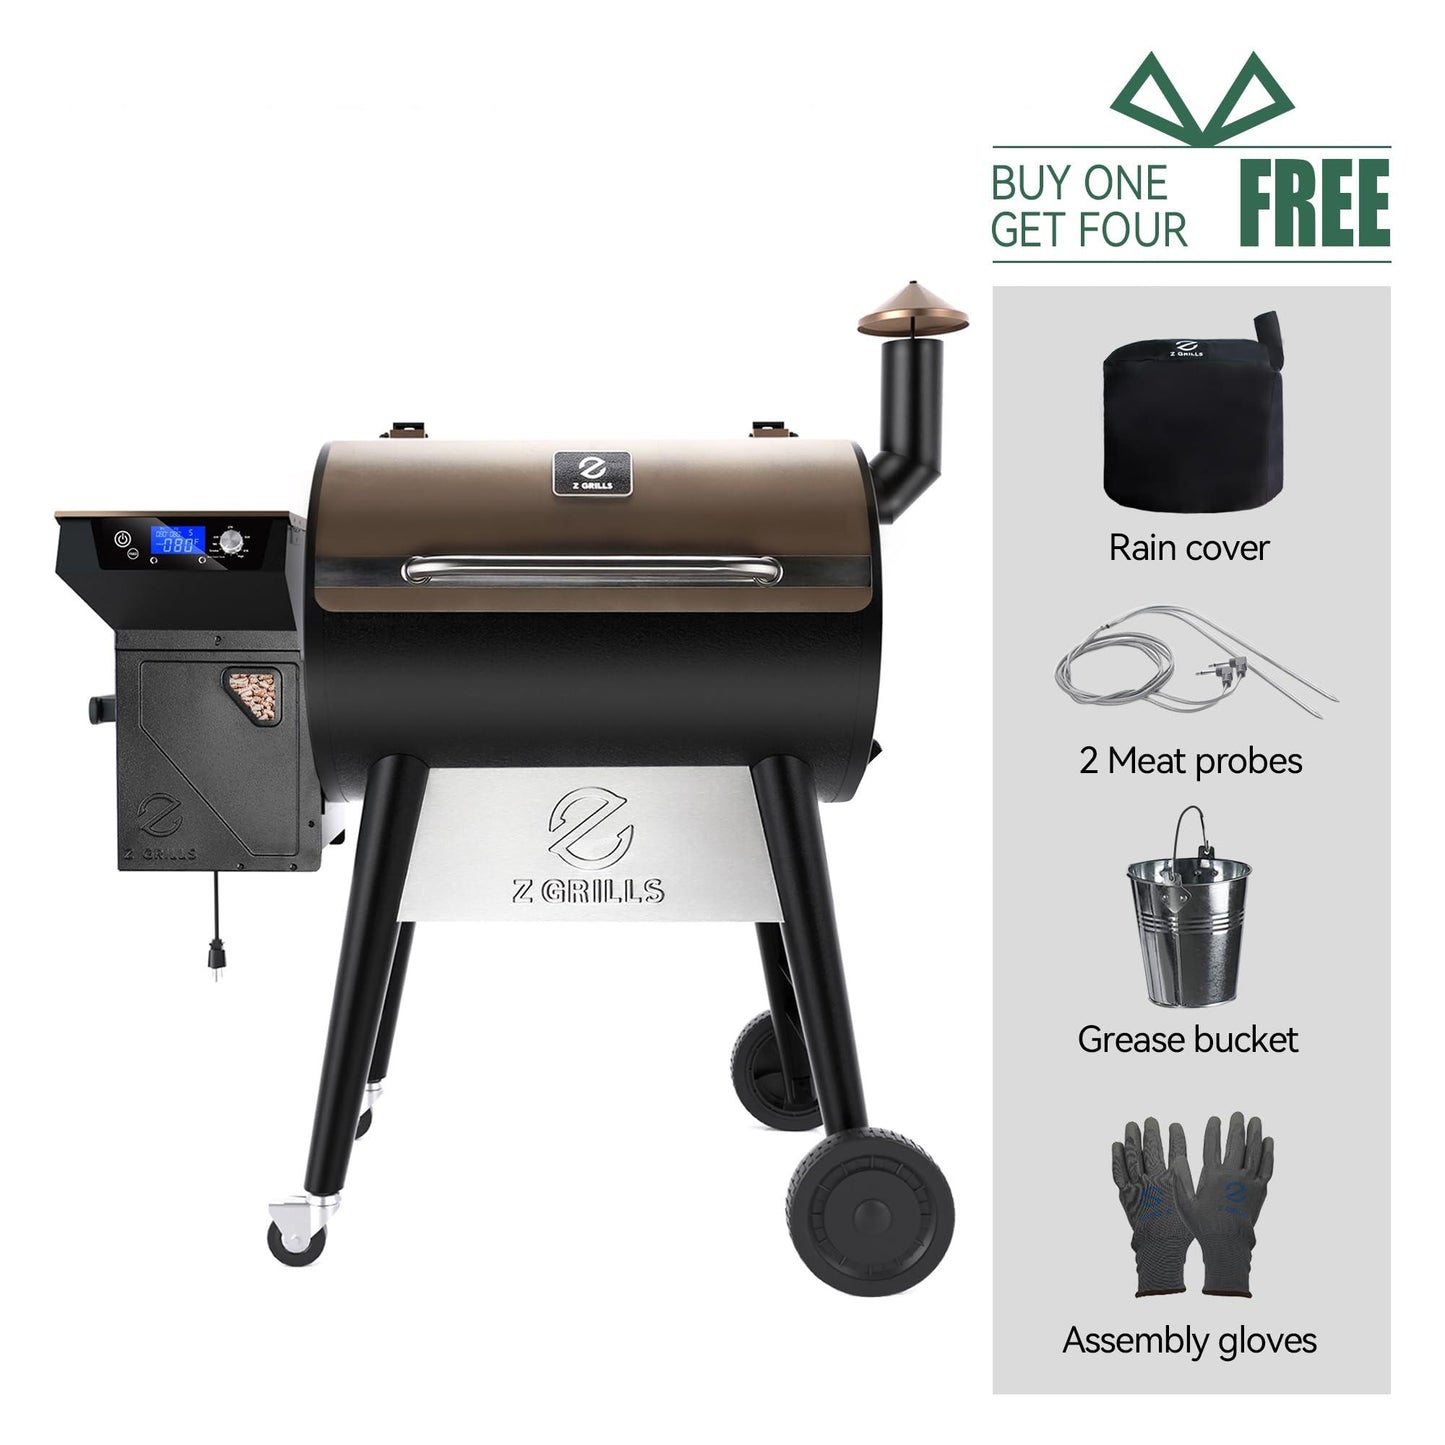 Z GRILLS Wood Pellet Grill Smoker with PID 2.0 Controller, 700 Cooking Area, Meat Probes, Rain Cover for Outdoor BBQ, 7002C - CookCave